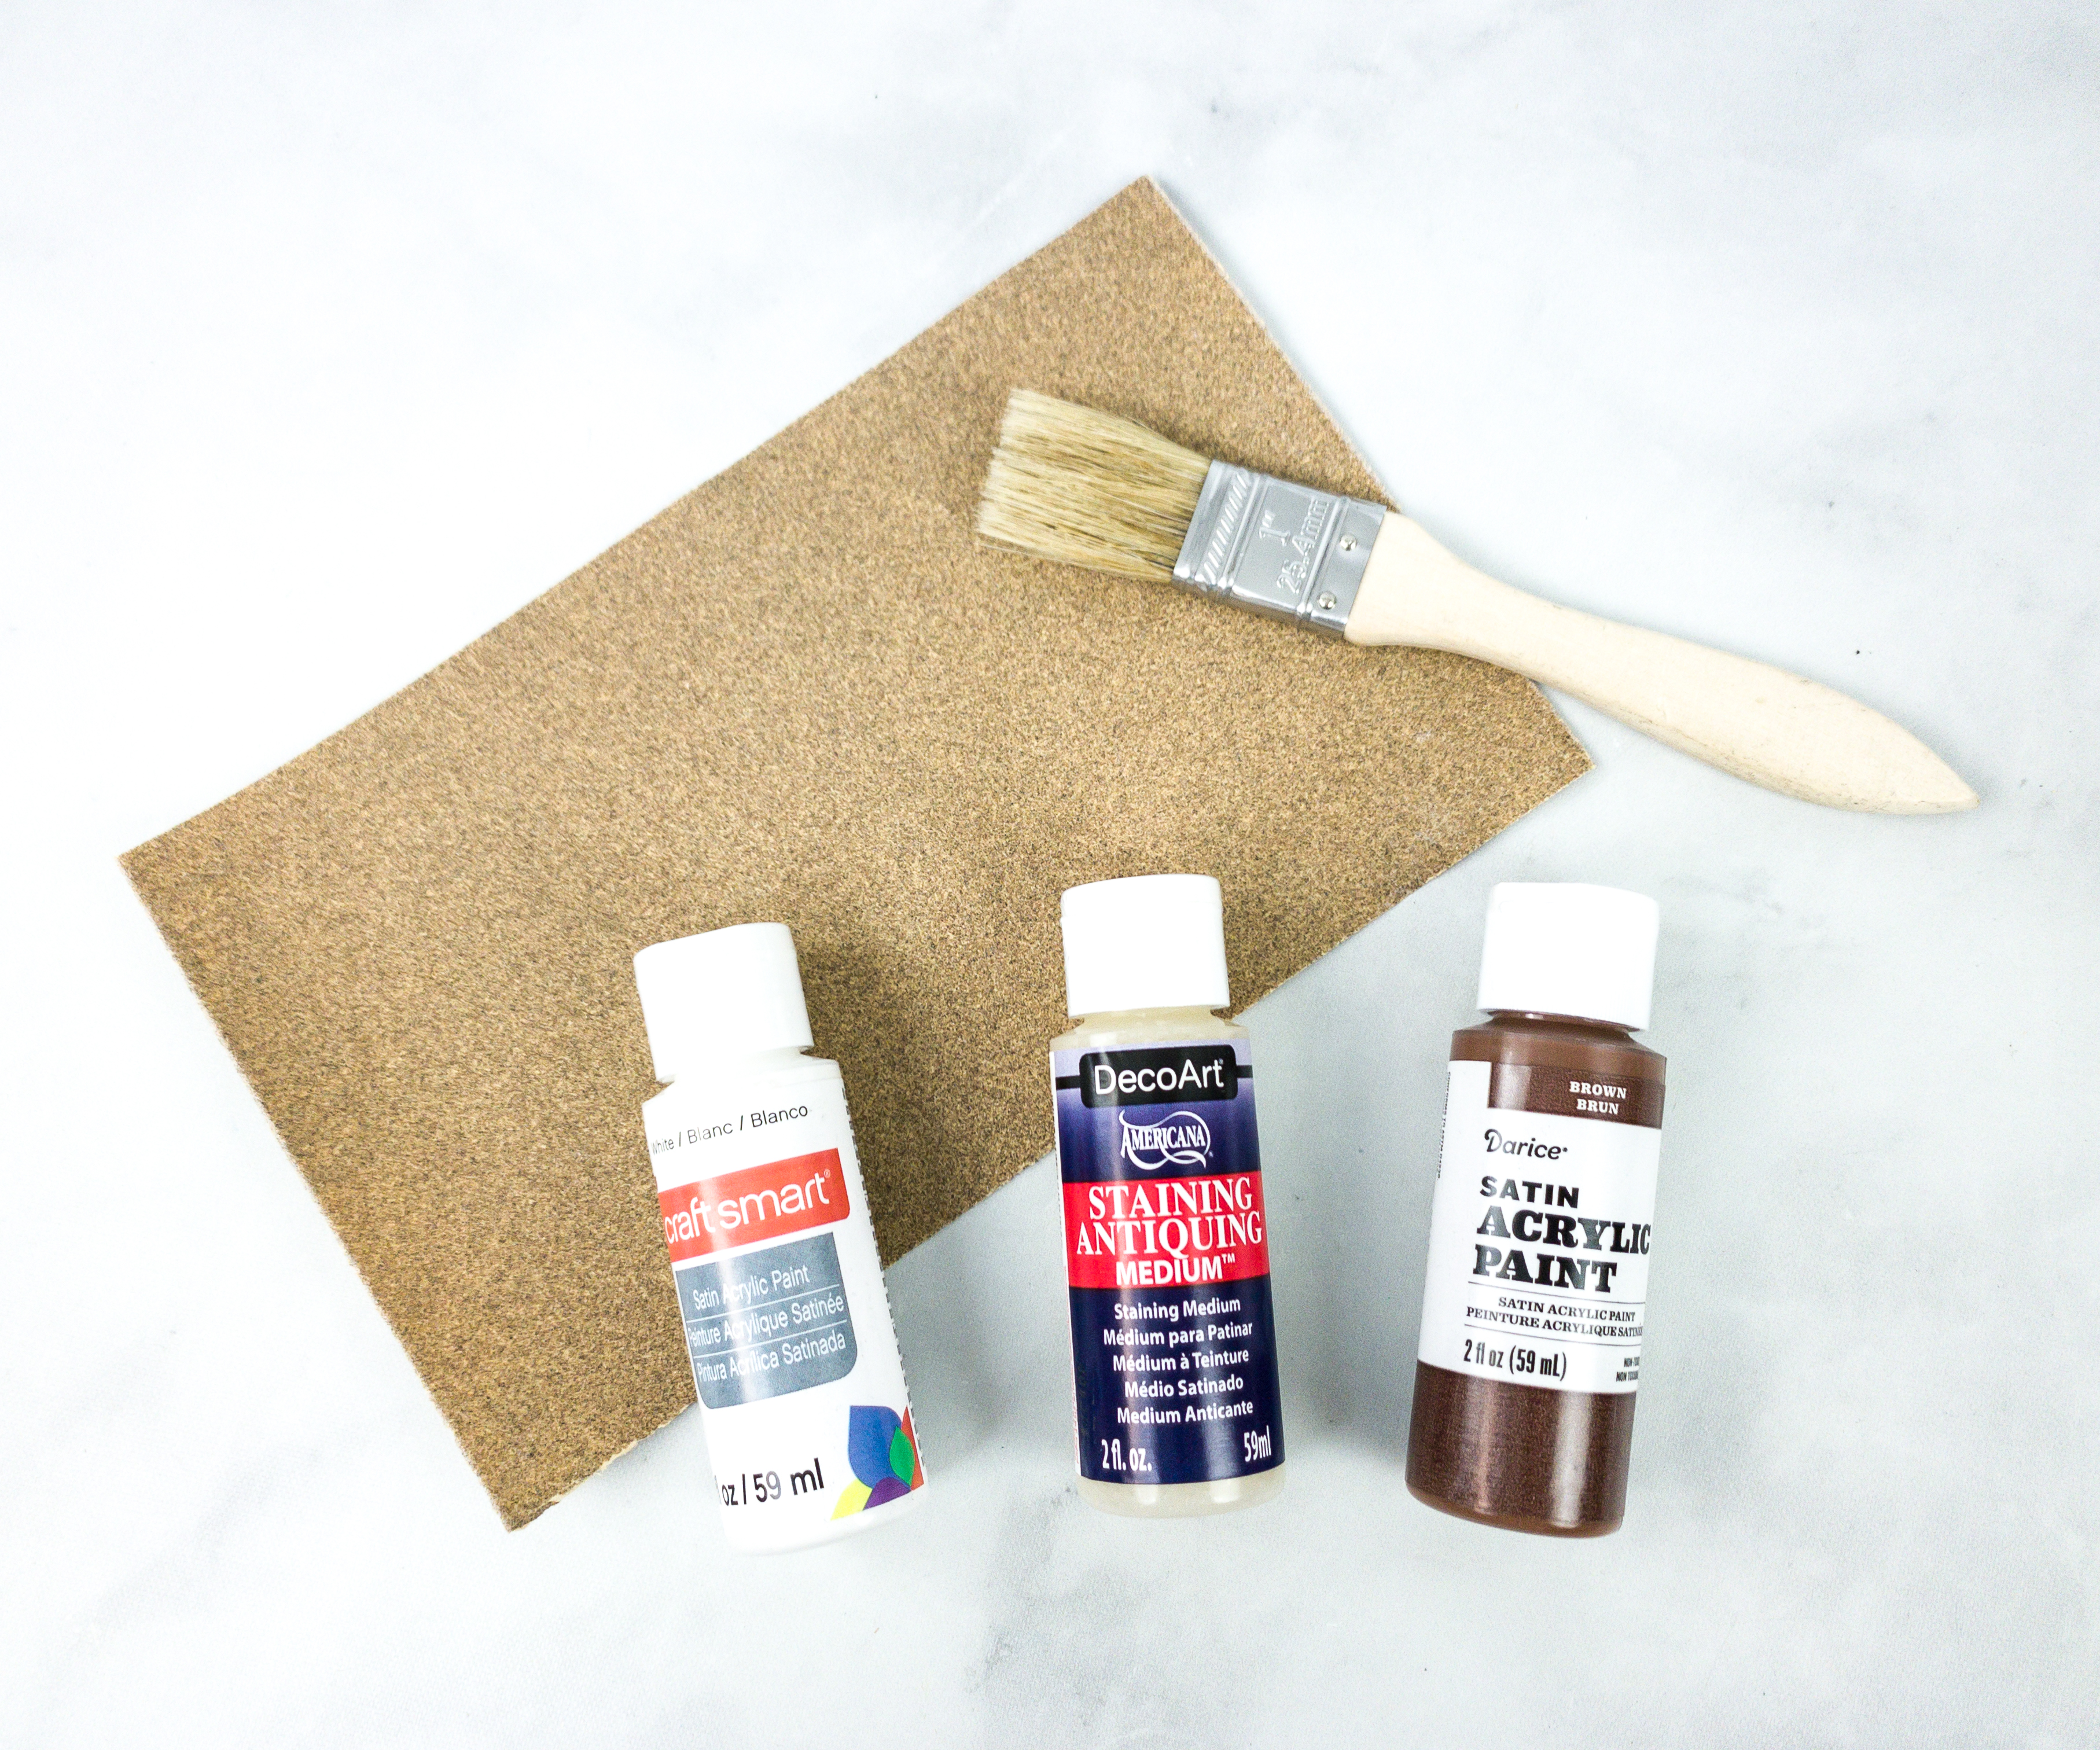 Adults & Crafts Subscription Box Review + Coupon - WEATHERED WOOD CADDY -  Hello Subscription